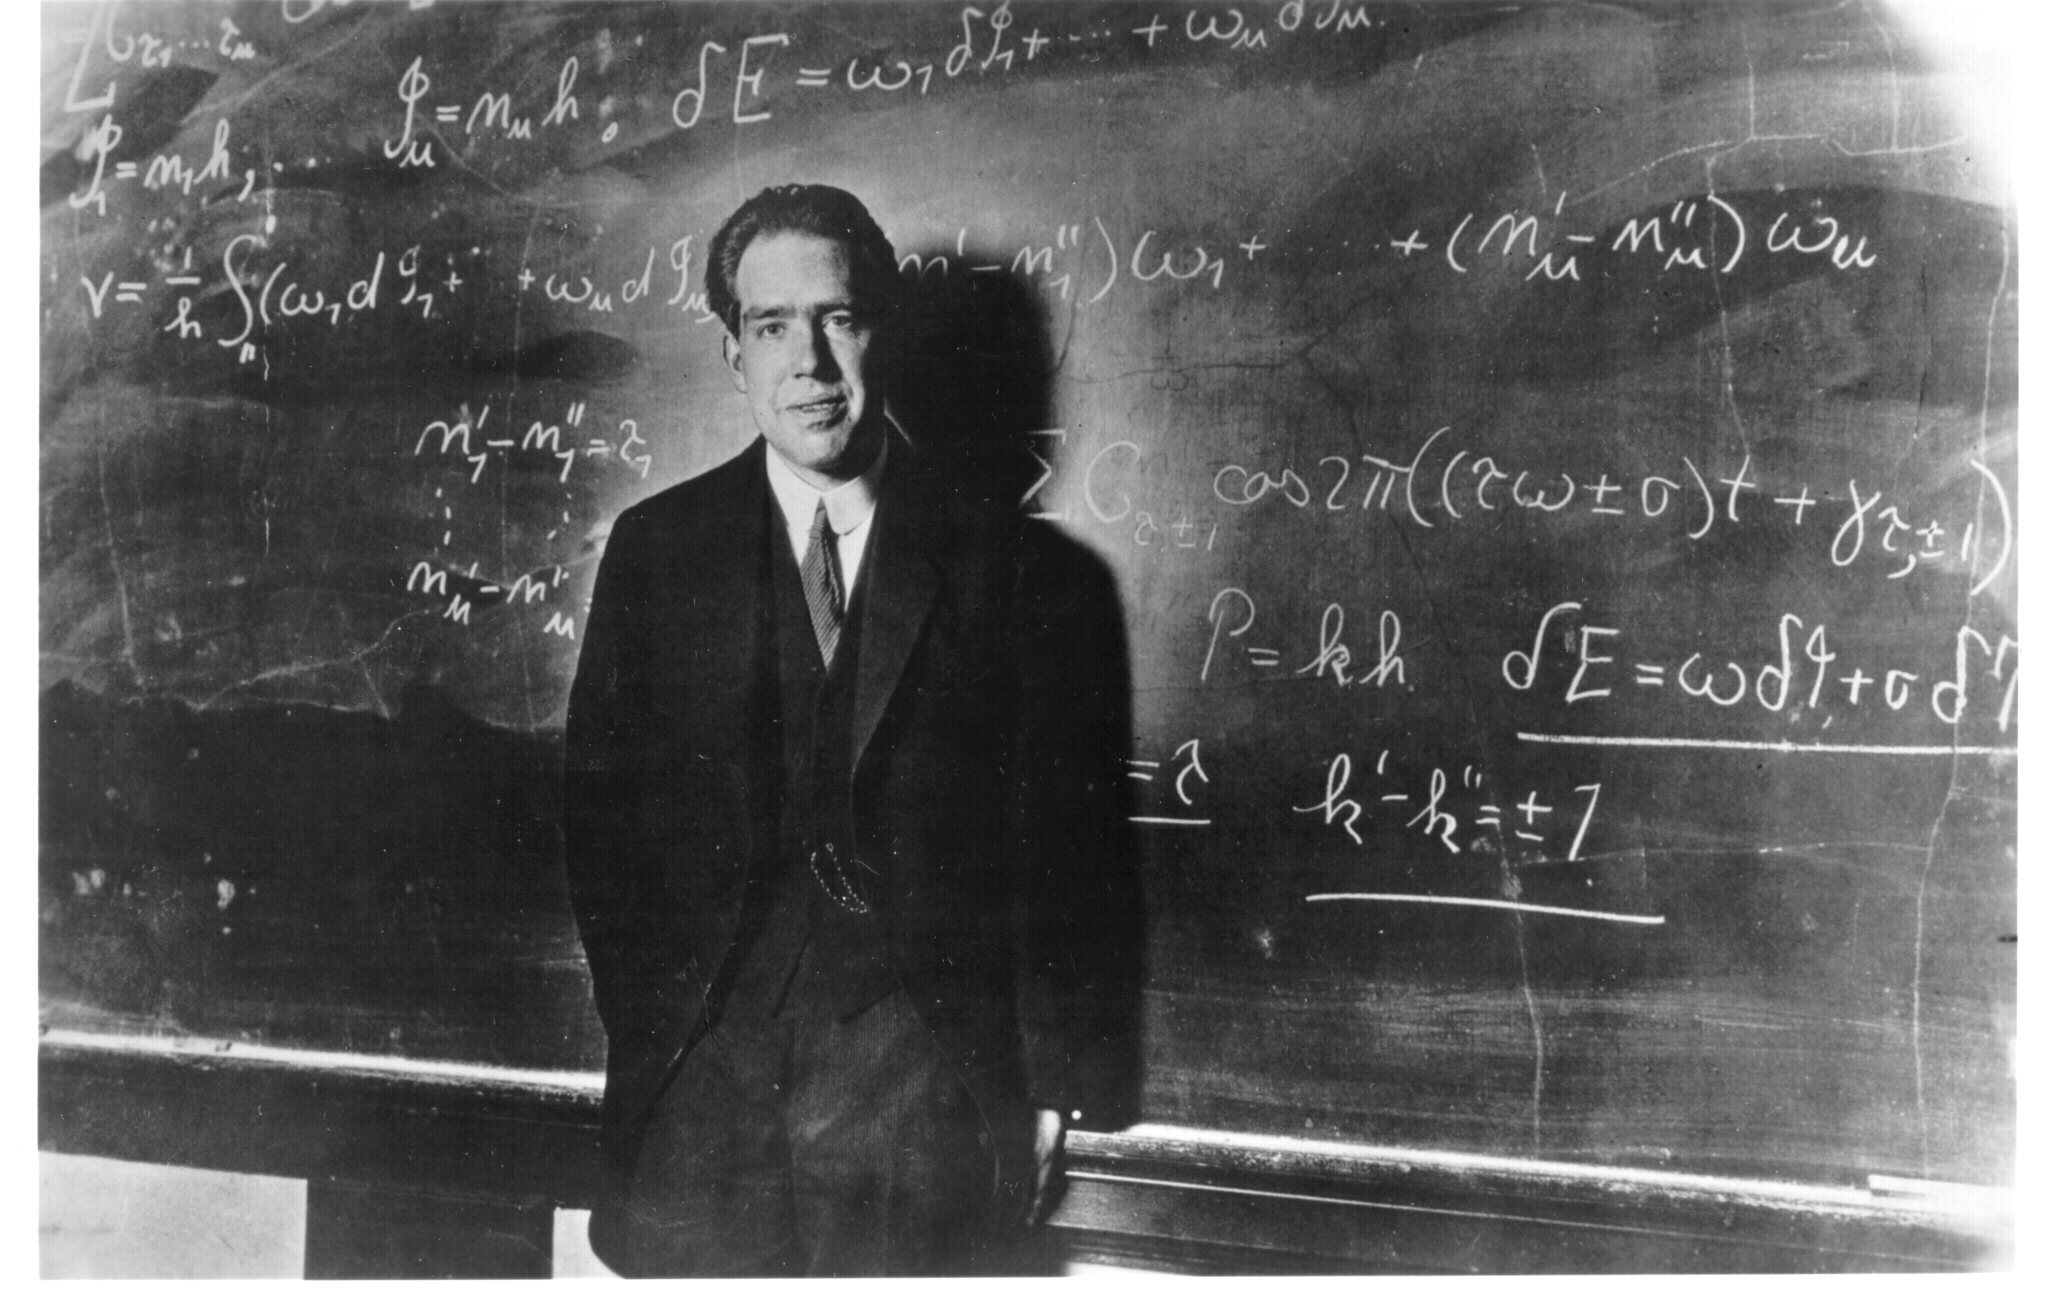 Niels Bohr as a younger man, at a chalkboard.